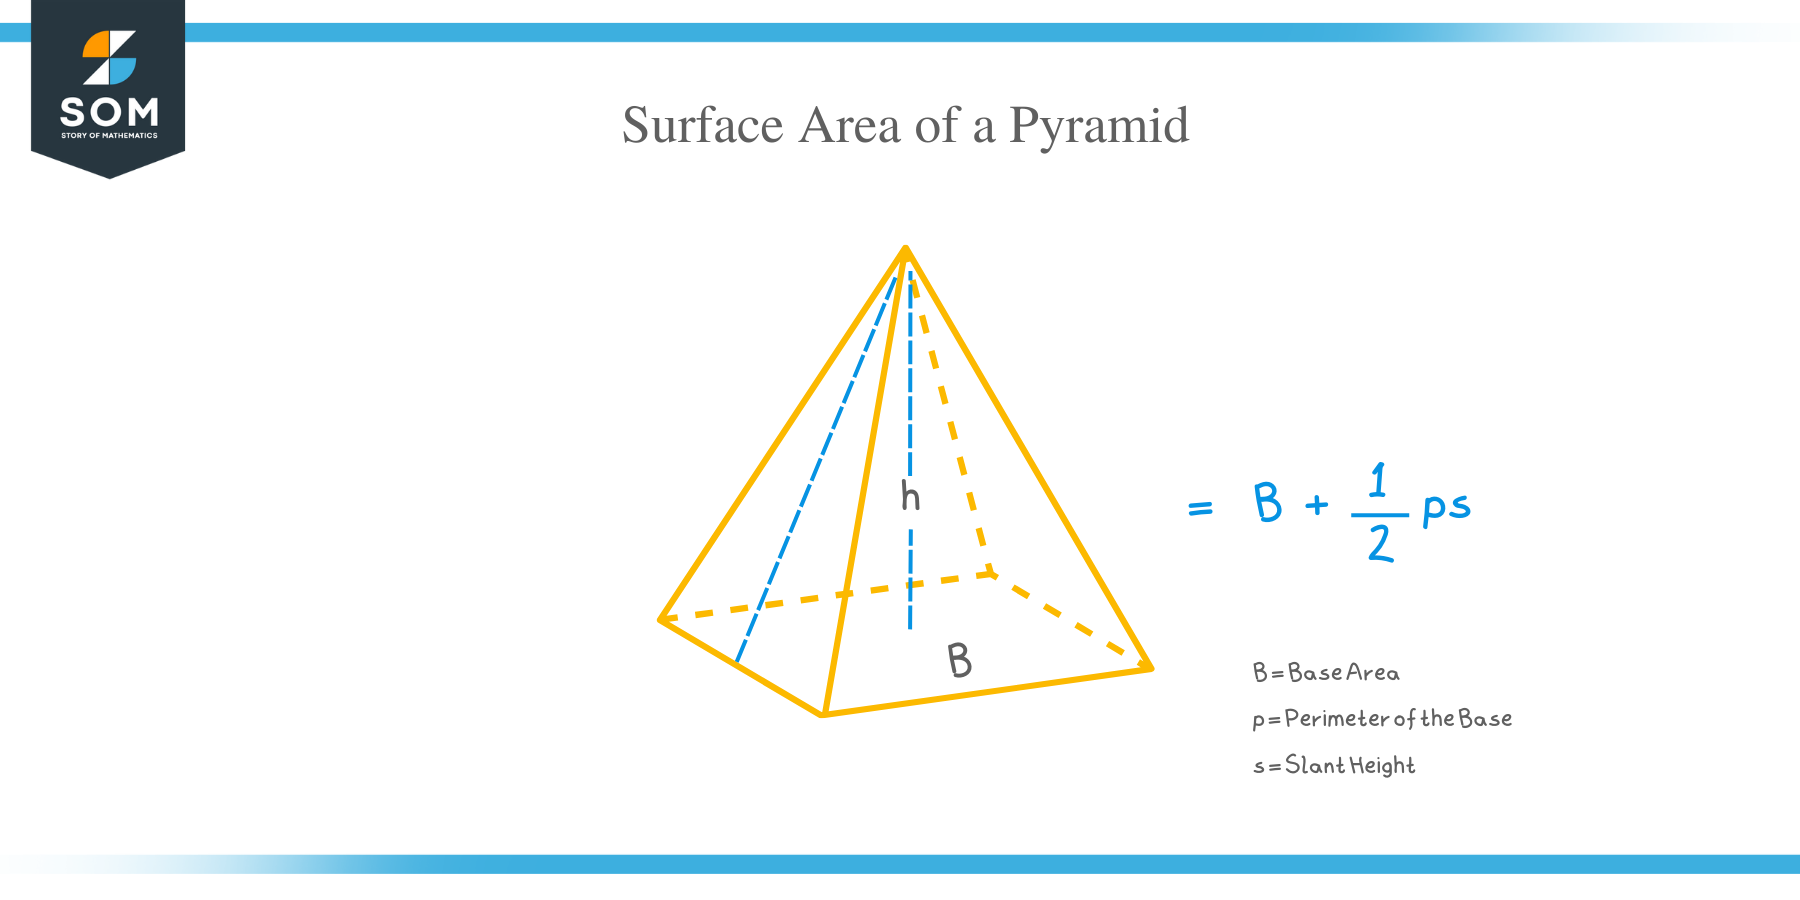 How to Find the Surface Area of a Pyramid?